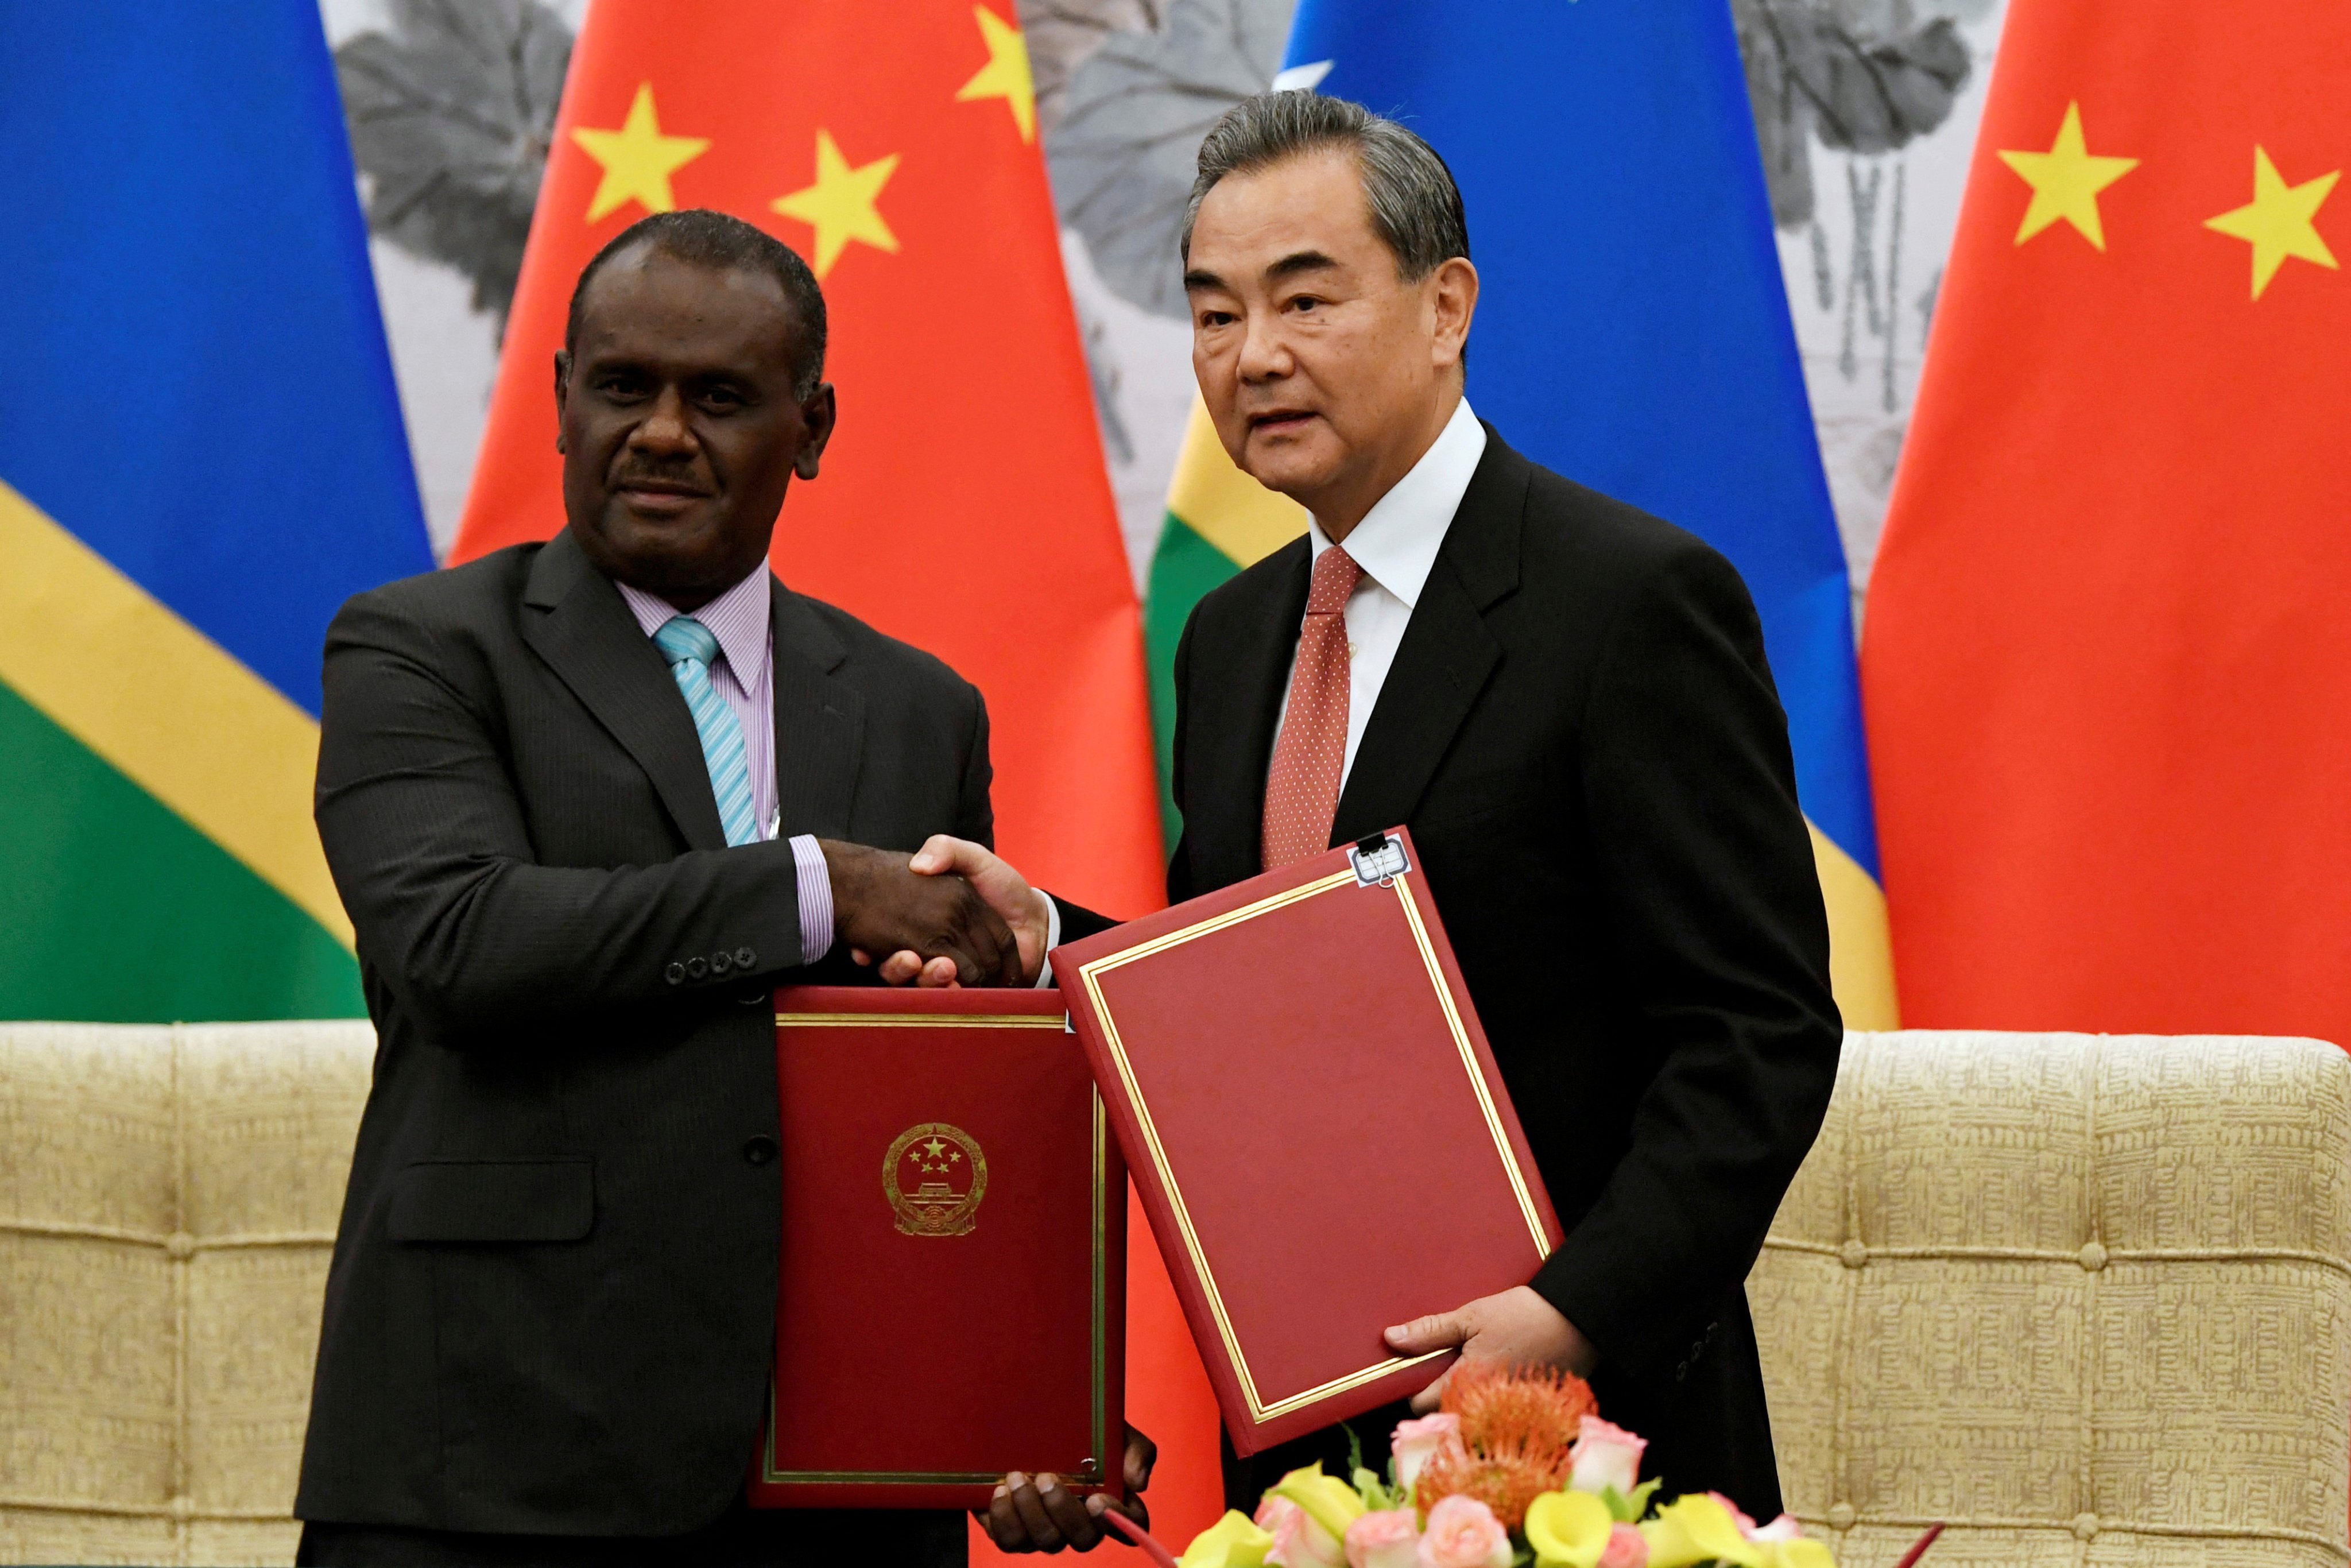 Chinese Foreign Minister Wang Yi shakes hands with Solomon Islands then Foreign Minister Jeremiah Manele at an event in Beijing in 2019. Manele has been chosen as the Solomons’ new prime minister. Photo: Reuters